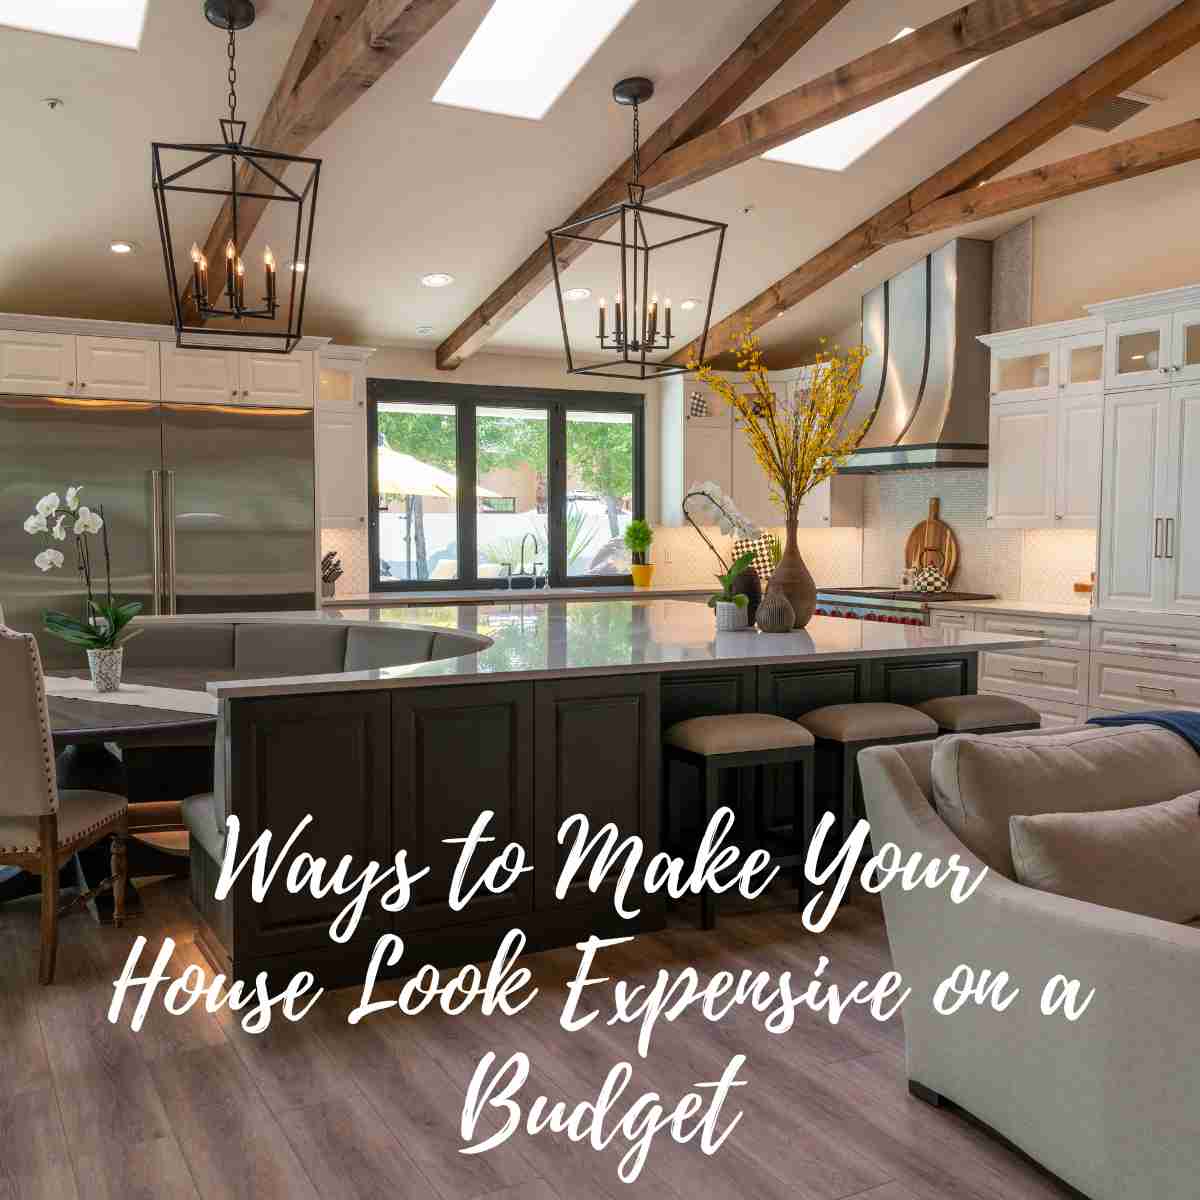 Ways to Make Your House Look Expensive on a Budget